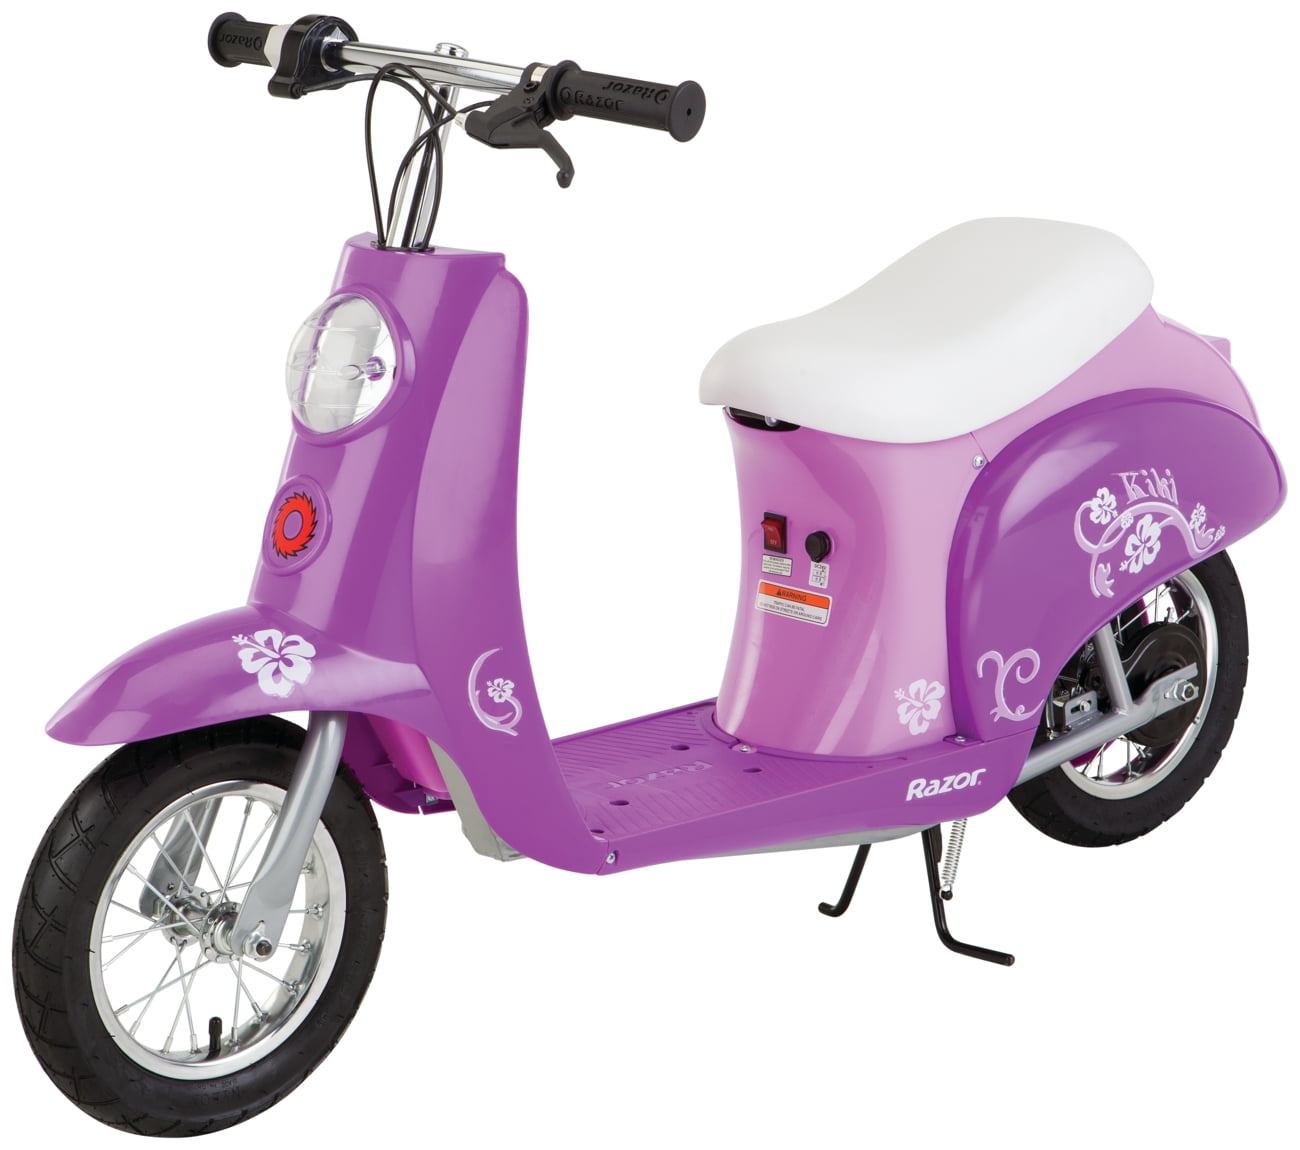 Razor Pocket Mod - Kiki 24V Euro-Style Scooter with Seat, Vintage-Inspired Design, Up to 15 mph and Up to 40 min Ride Time - Walmart.com